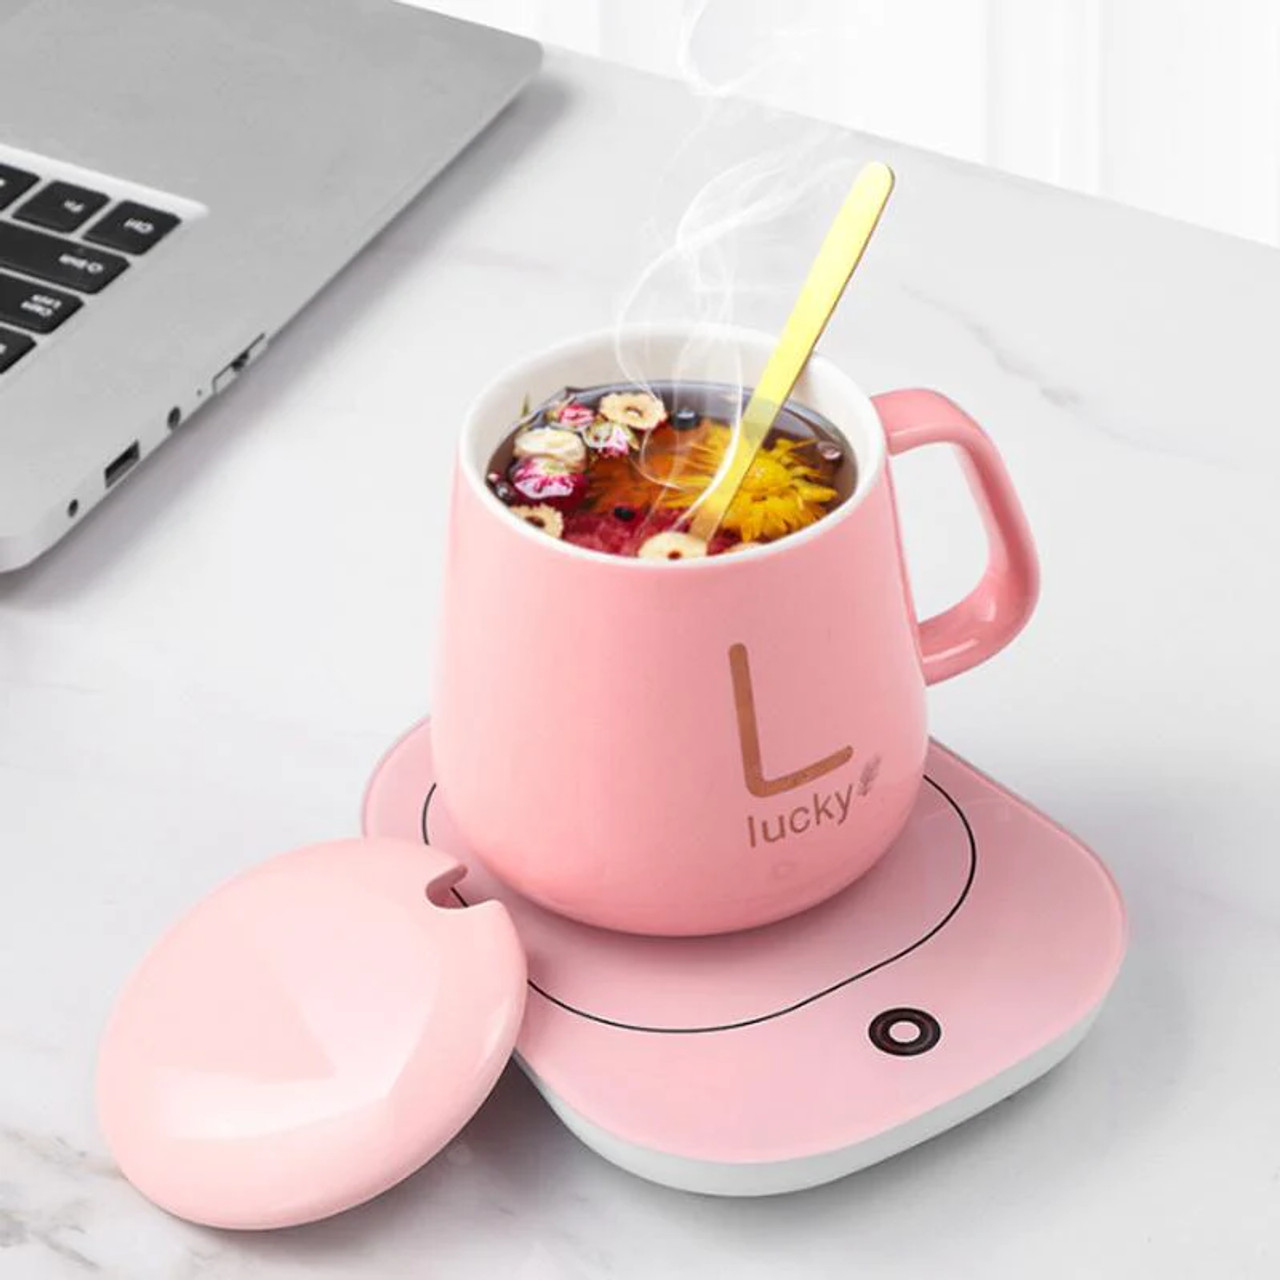 Lucky Portable Coffee Cup Warmer Heater Set